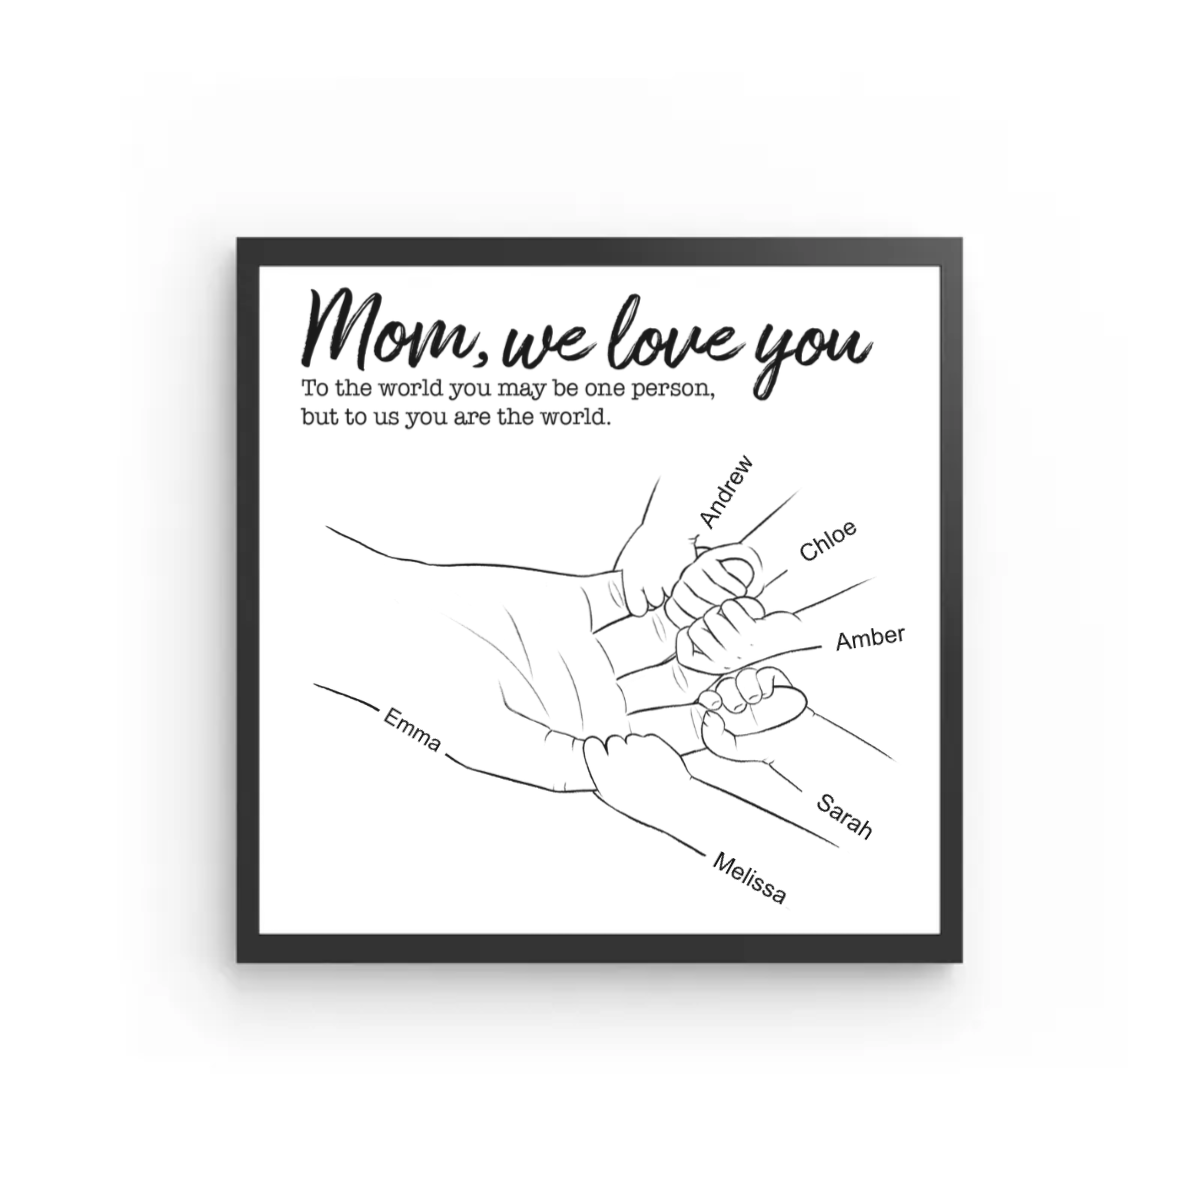 I Wanna Hold Your Hand - Mom & Child Bond - Up to 5 Kids  Framed MIXPIX® Foam Tiles